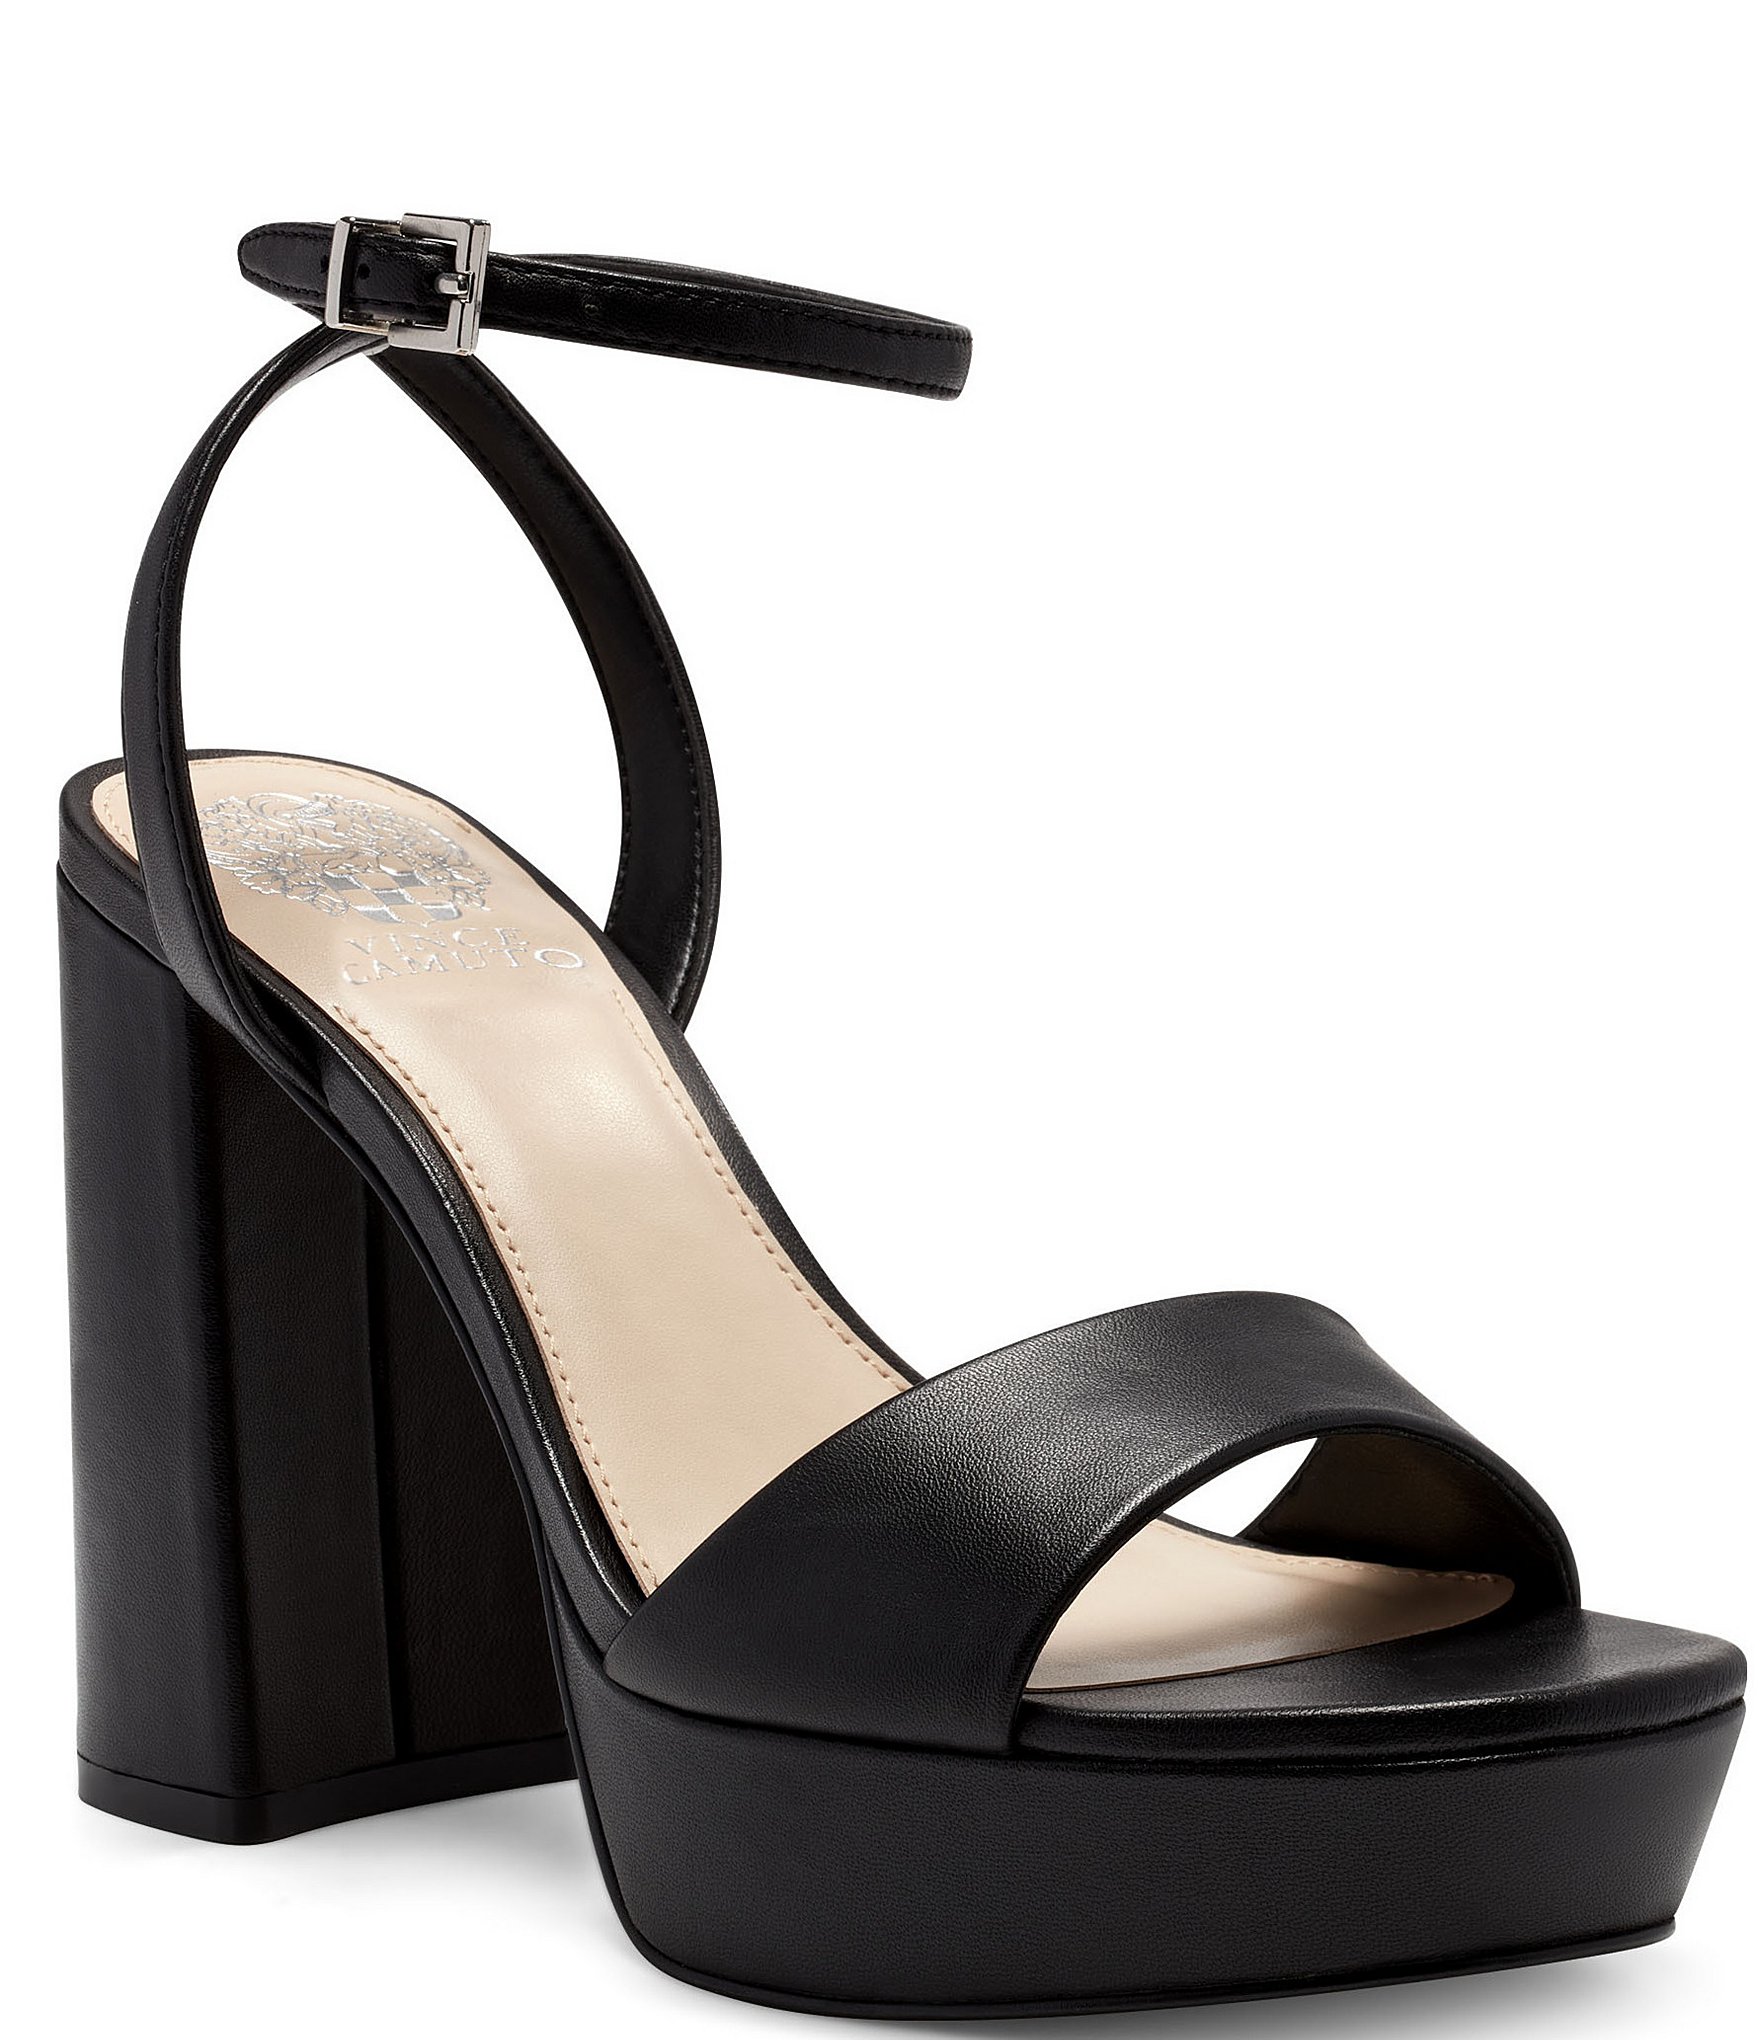 Vince Camuto, Shoes, Vince Camuto Beautiful New Black Sandals Endnota  Leather